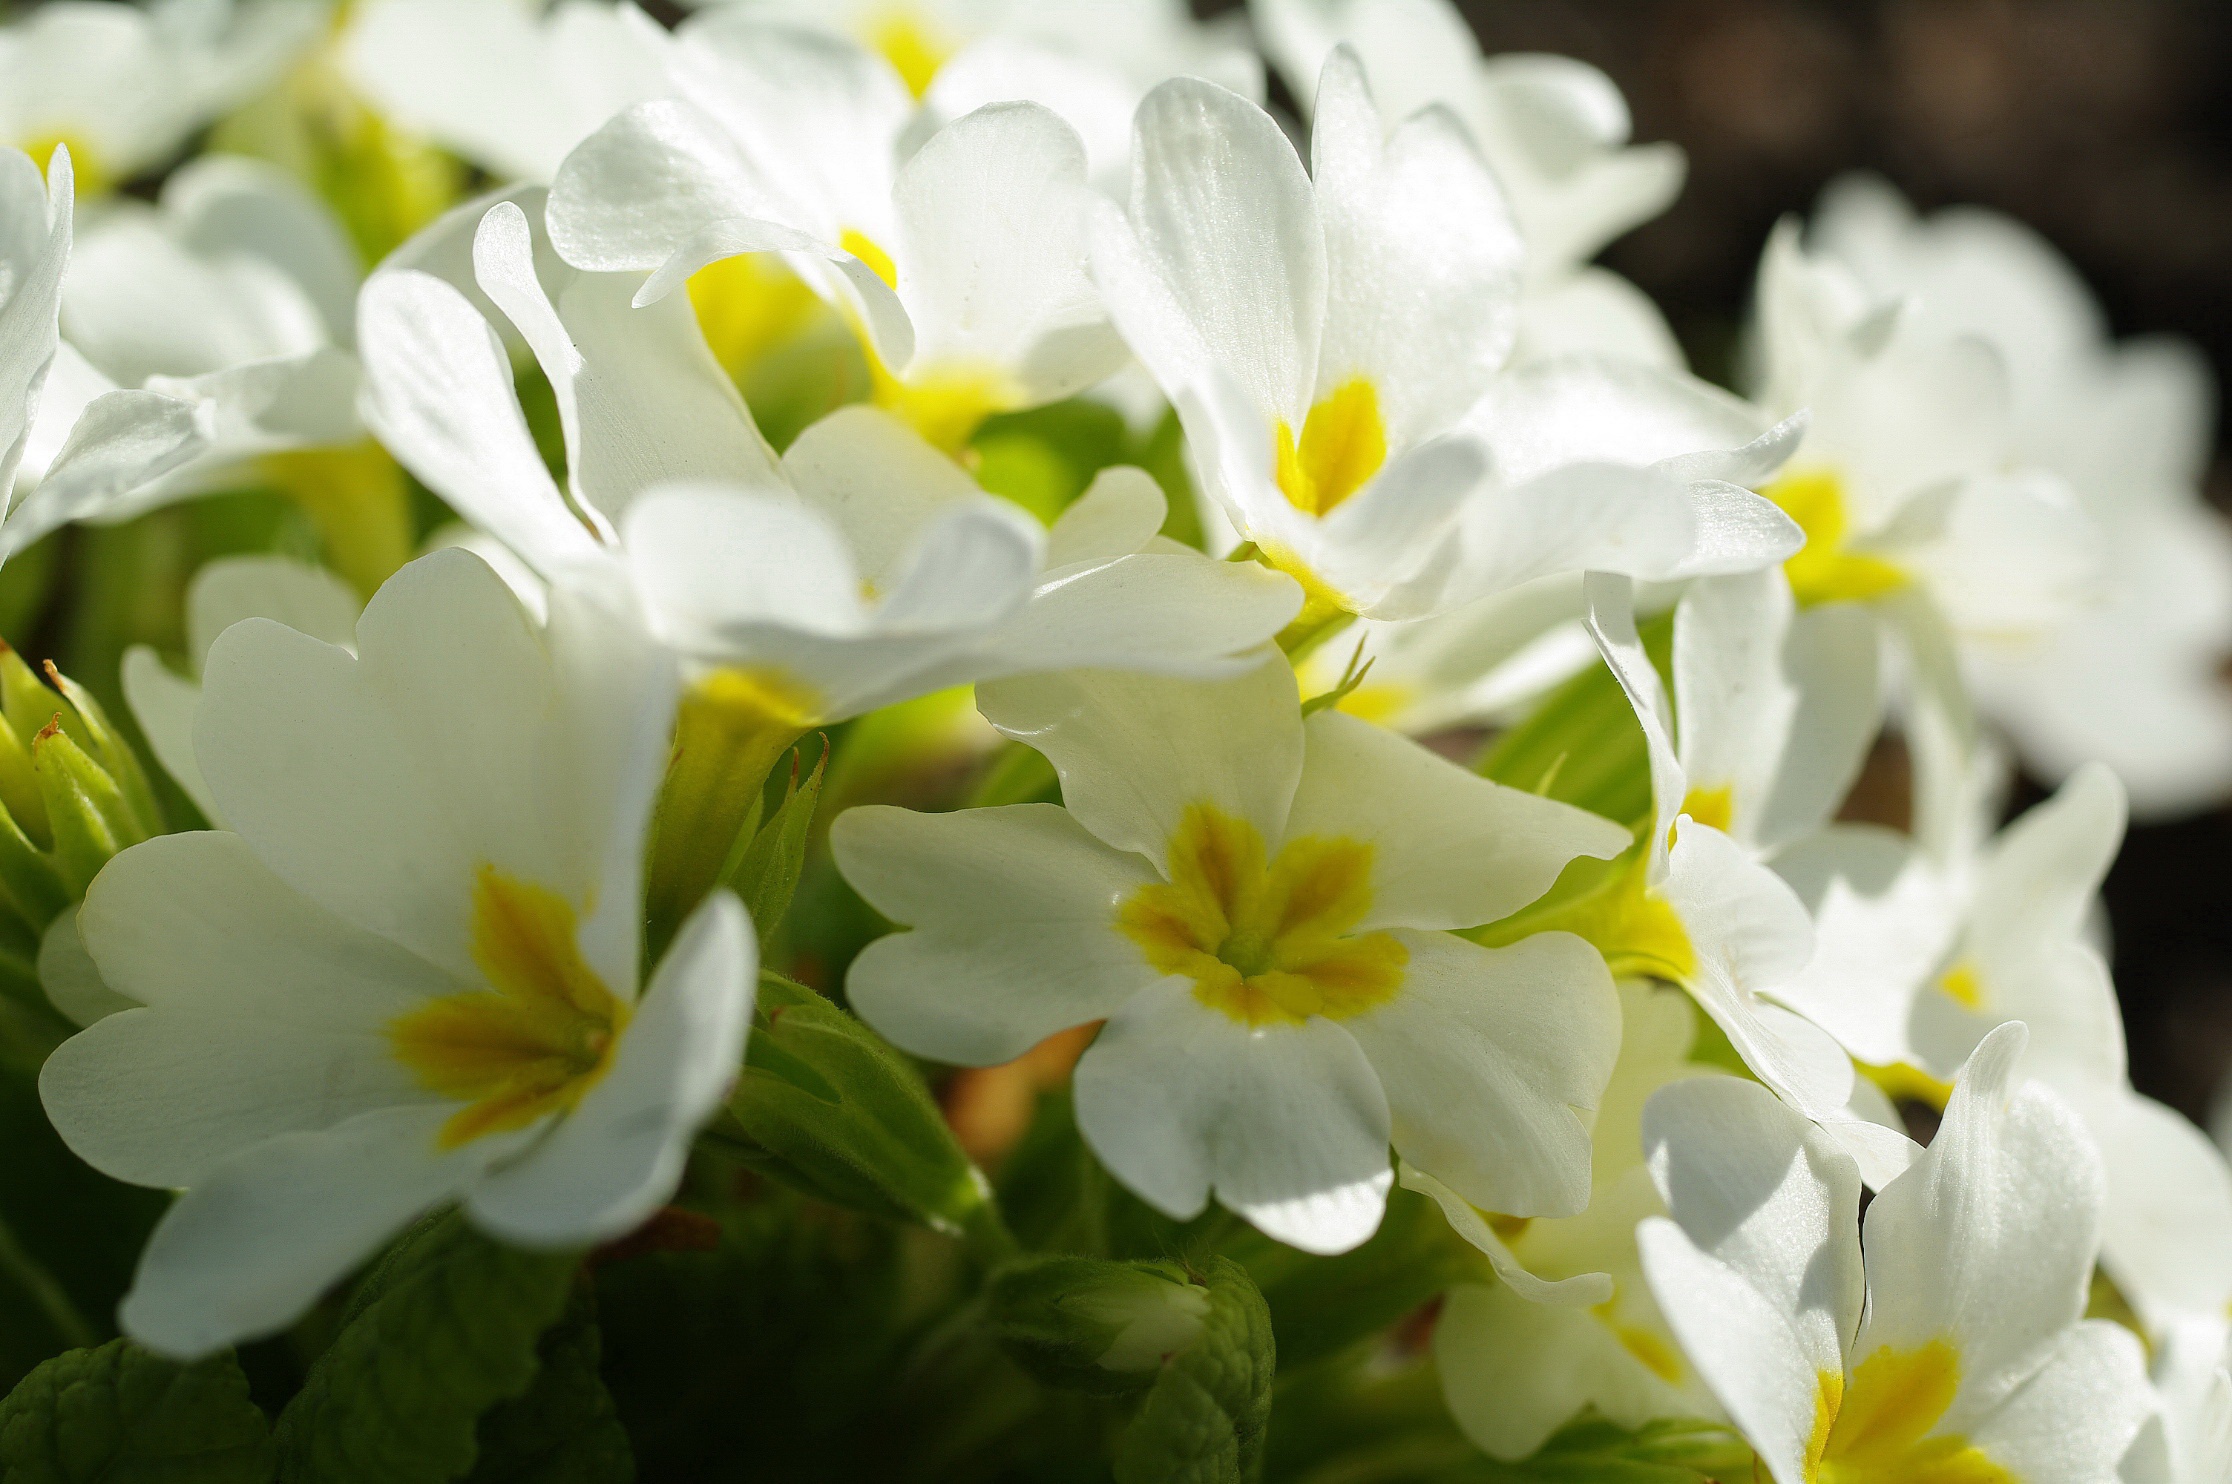 earth, primula, close up, flower, nature, white flower, flowers